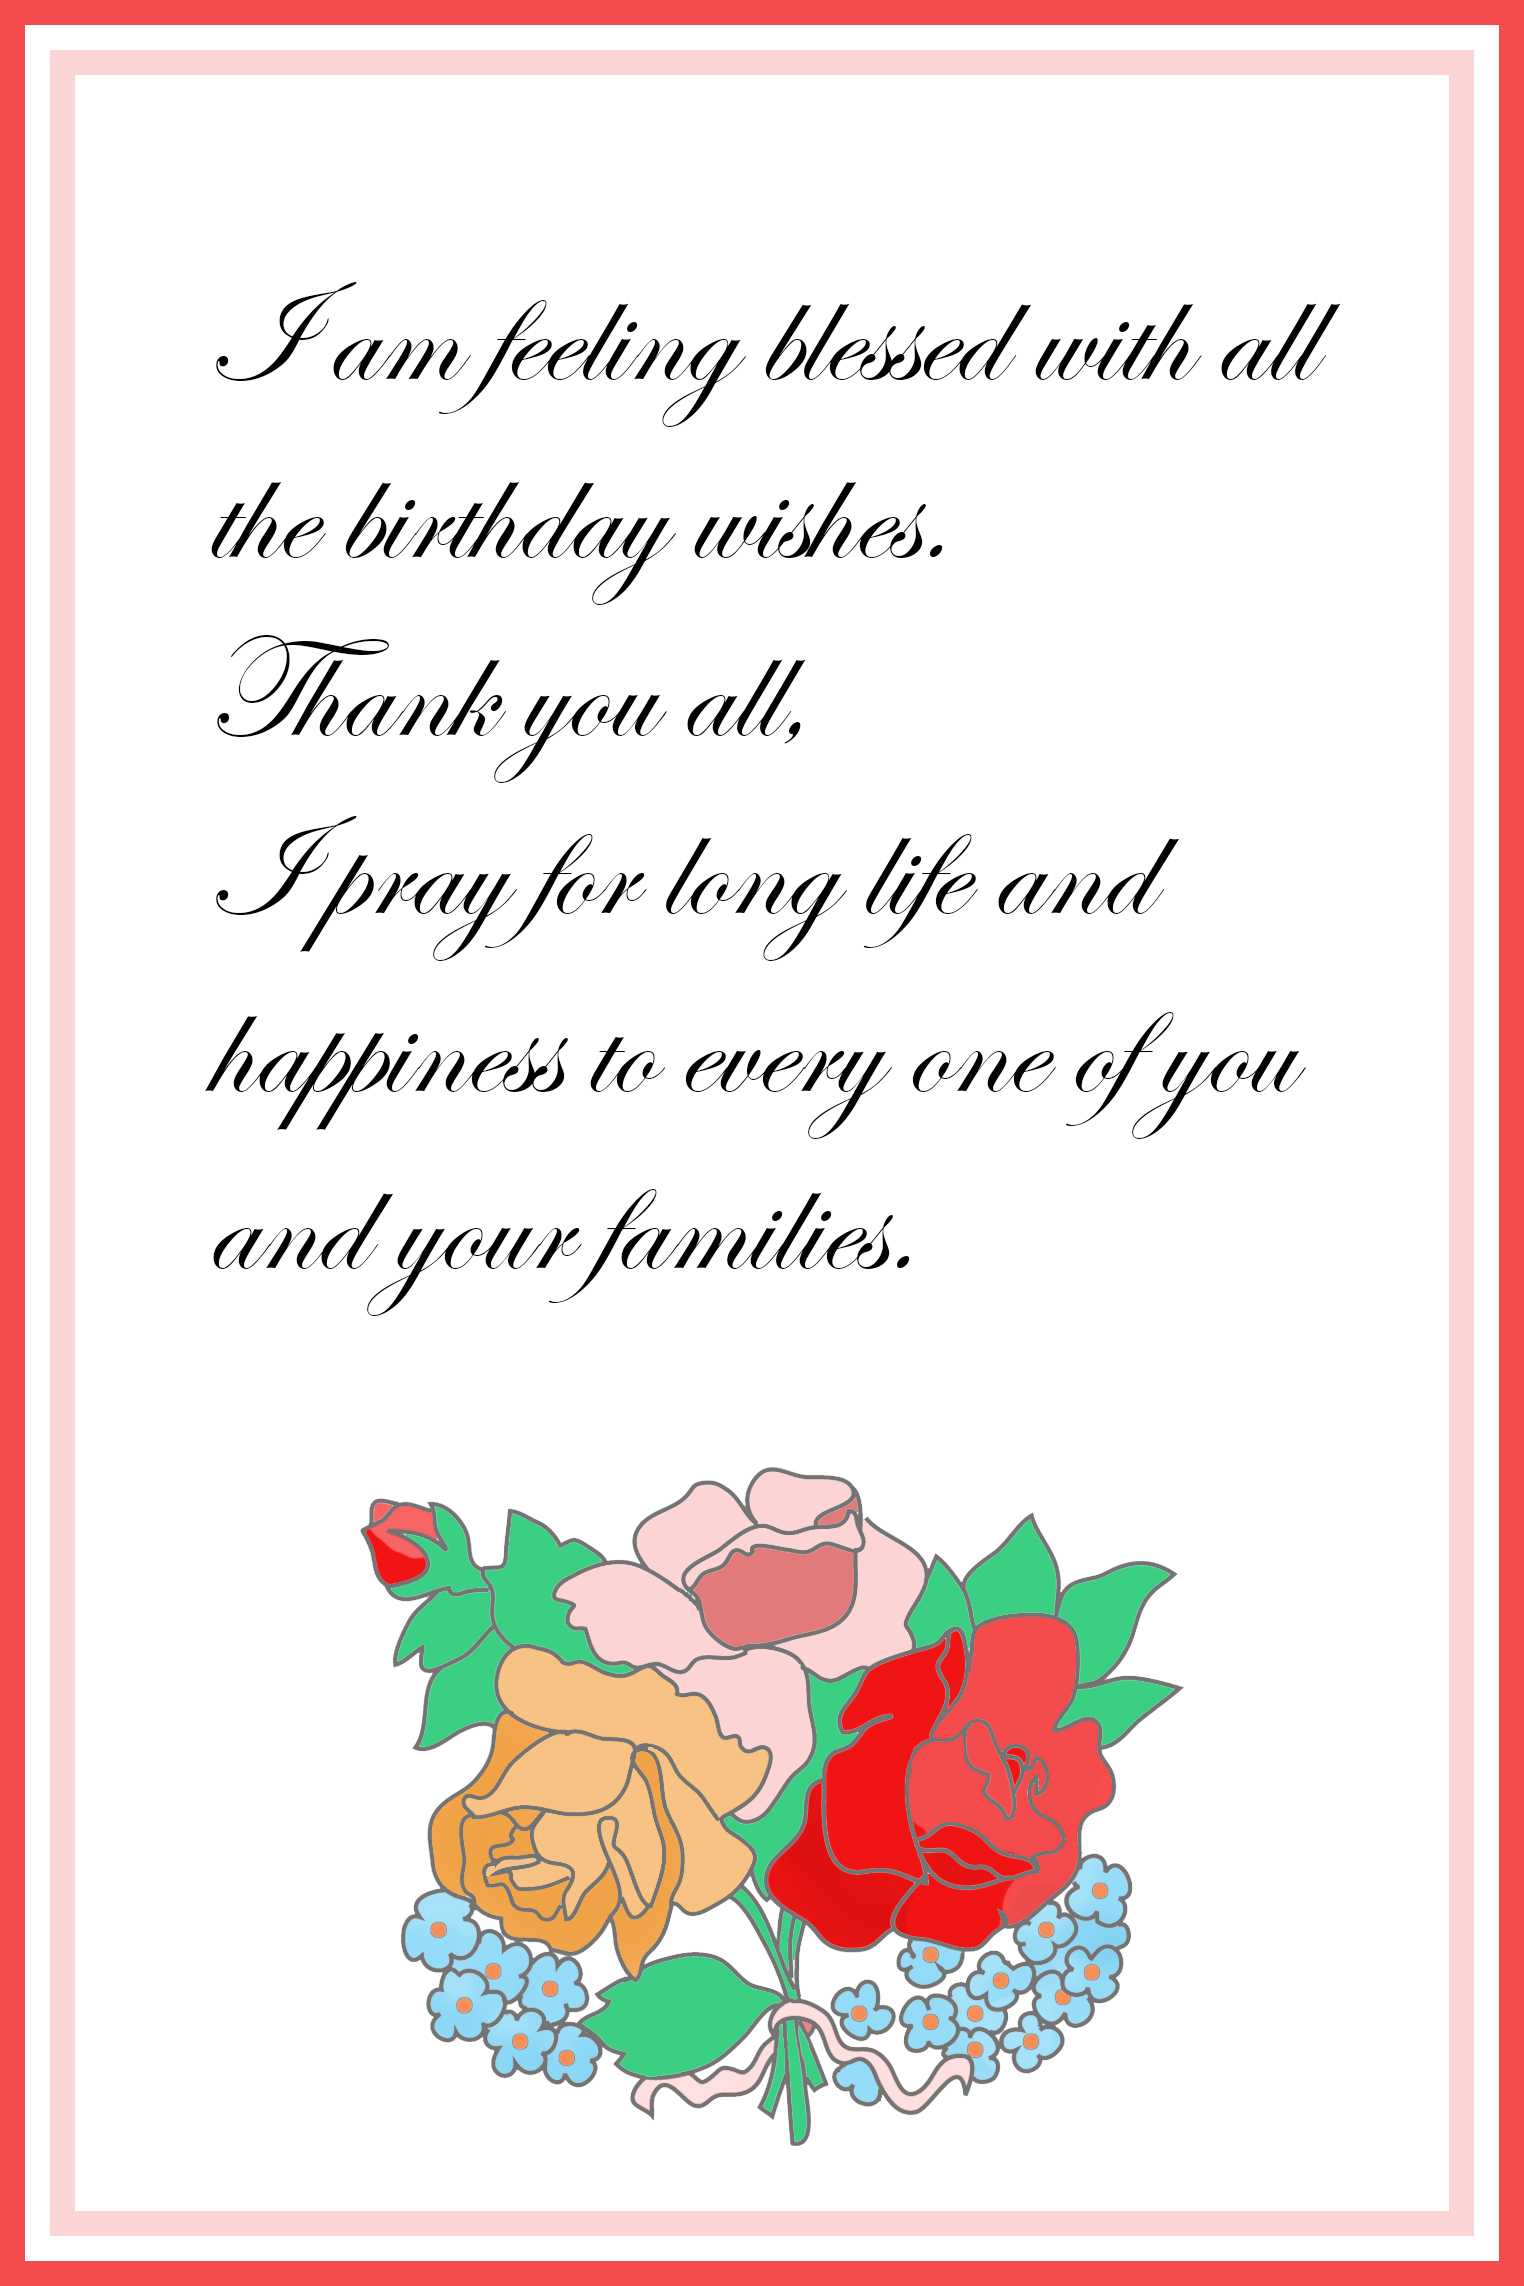 Printable Thank You Cards – Free Printable Greeting Cards For Print Your Own Christmas Cards Templates